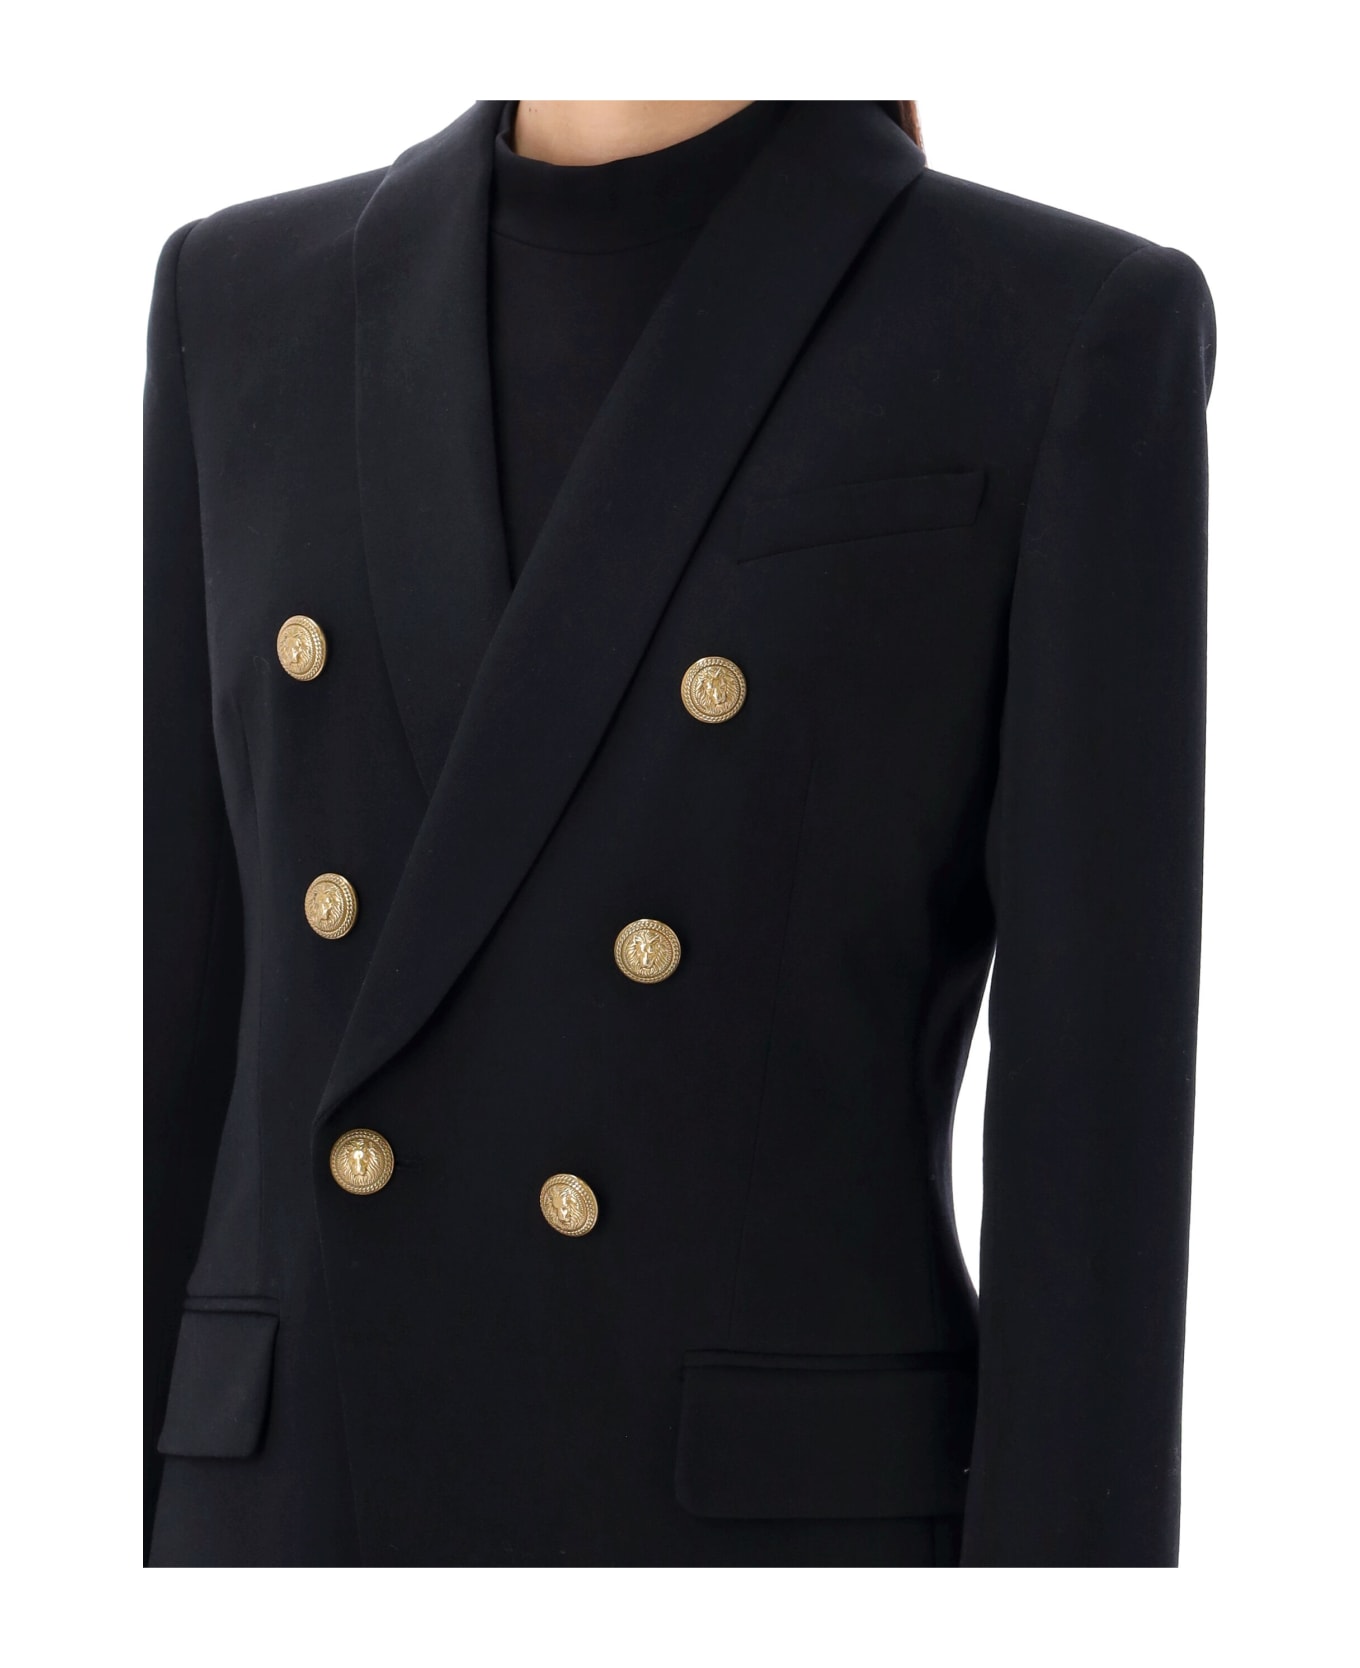 Balmain Double-breasted Jacket With Shaped Cut - BLACK